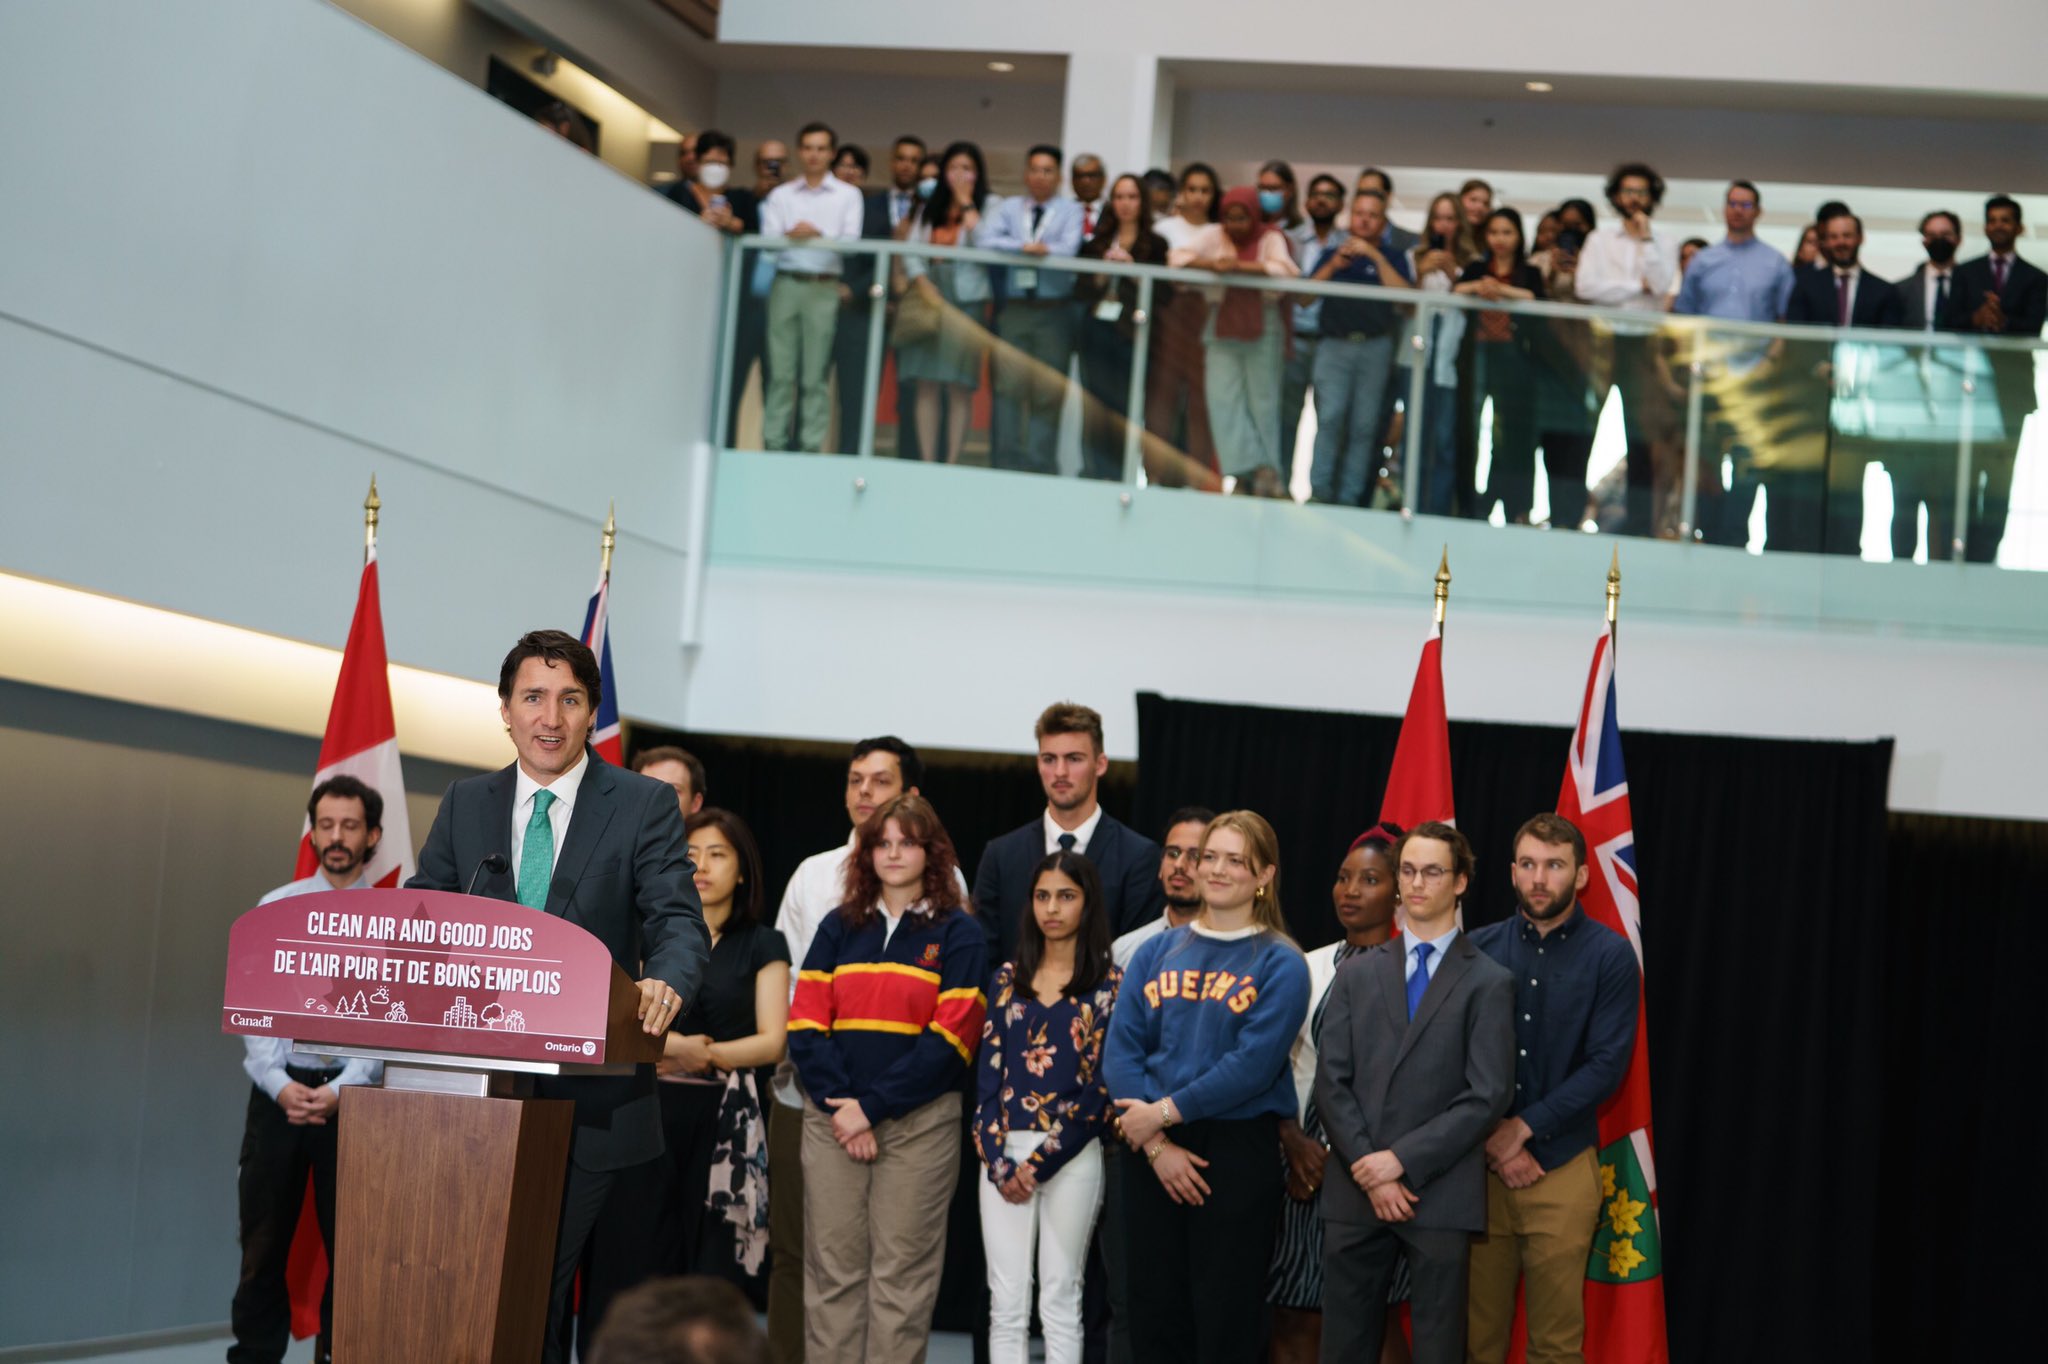 Prime Minister Justin Trudeau is standing at a podium and speaking. A large group of students are standing behind him. In the background, more students are standing on the second level of the atrium.